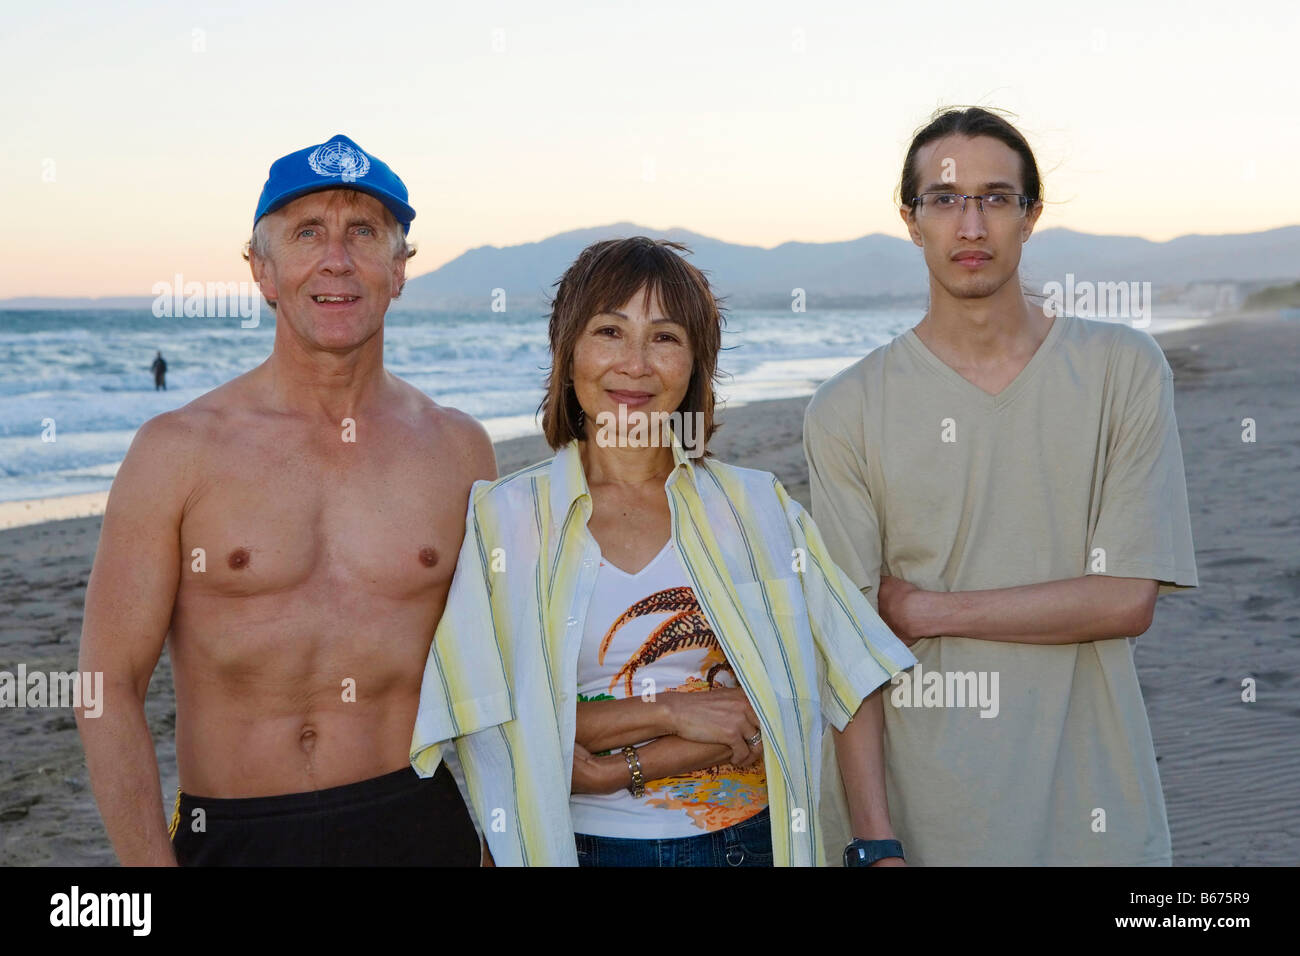 A family at a beach in Marbella, Spain at dusk Stock Photo